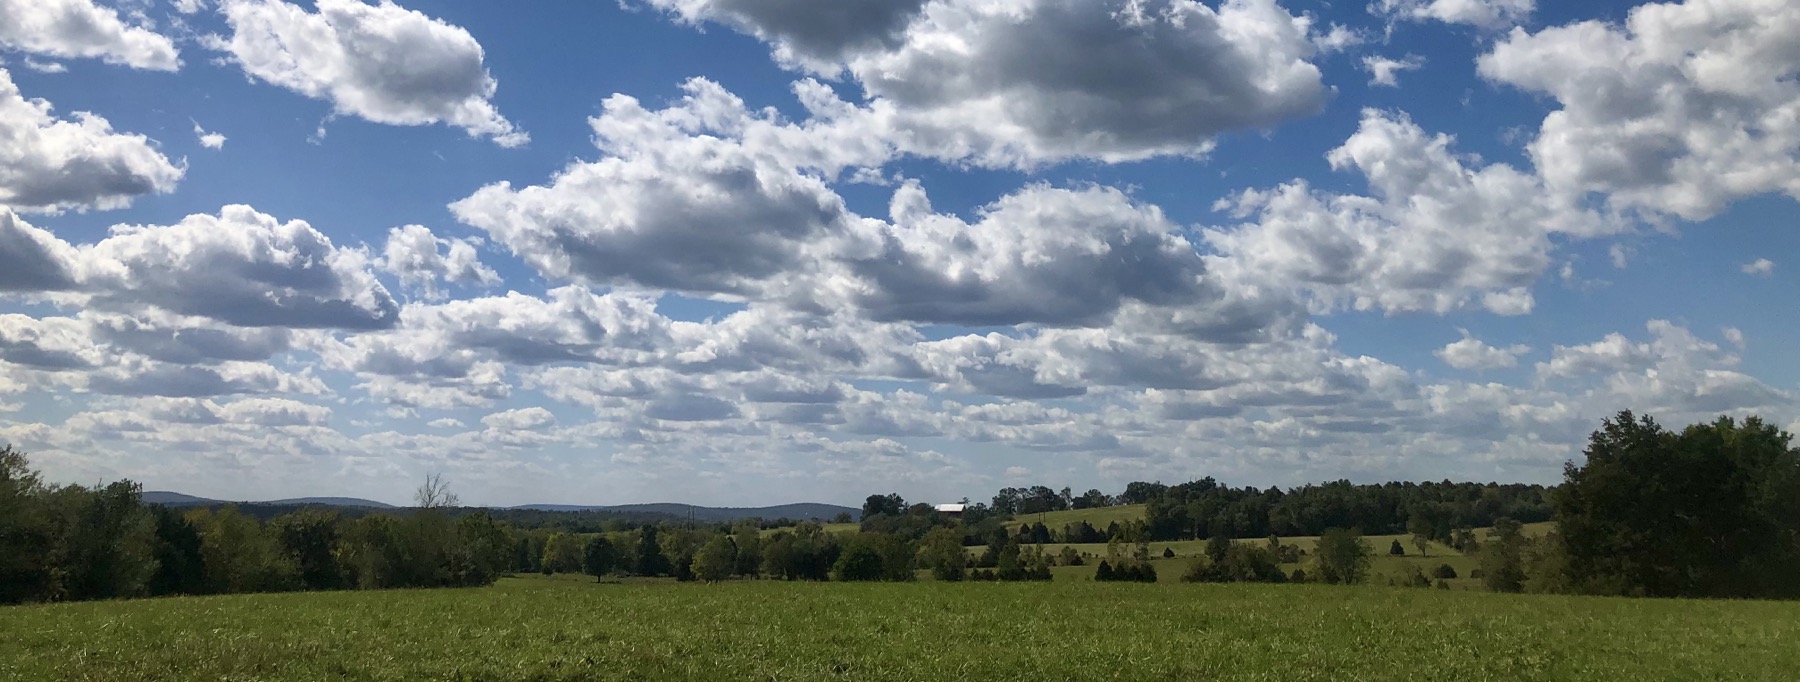 A bright blue sky with dramatic white clouds over a green farm landscape with rolling hills of fields and trees